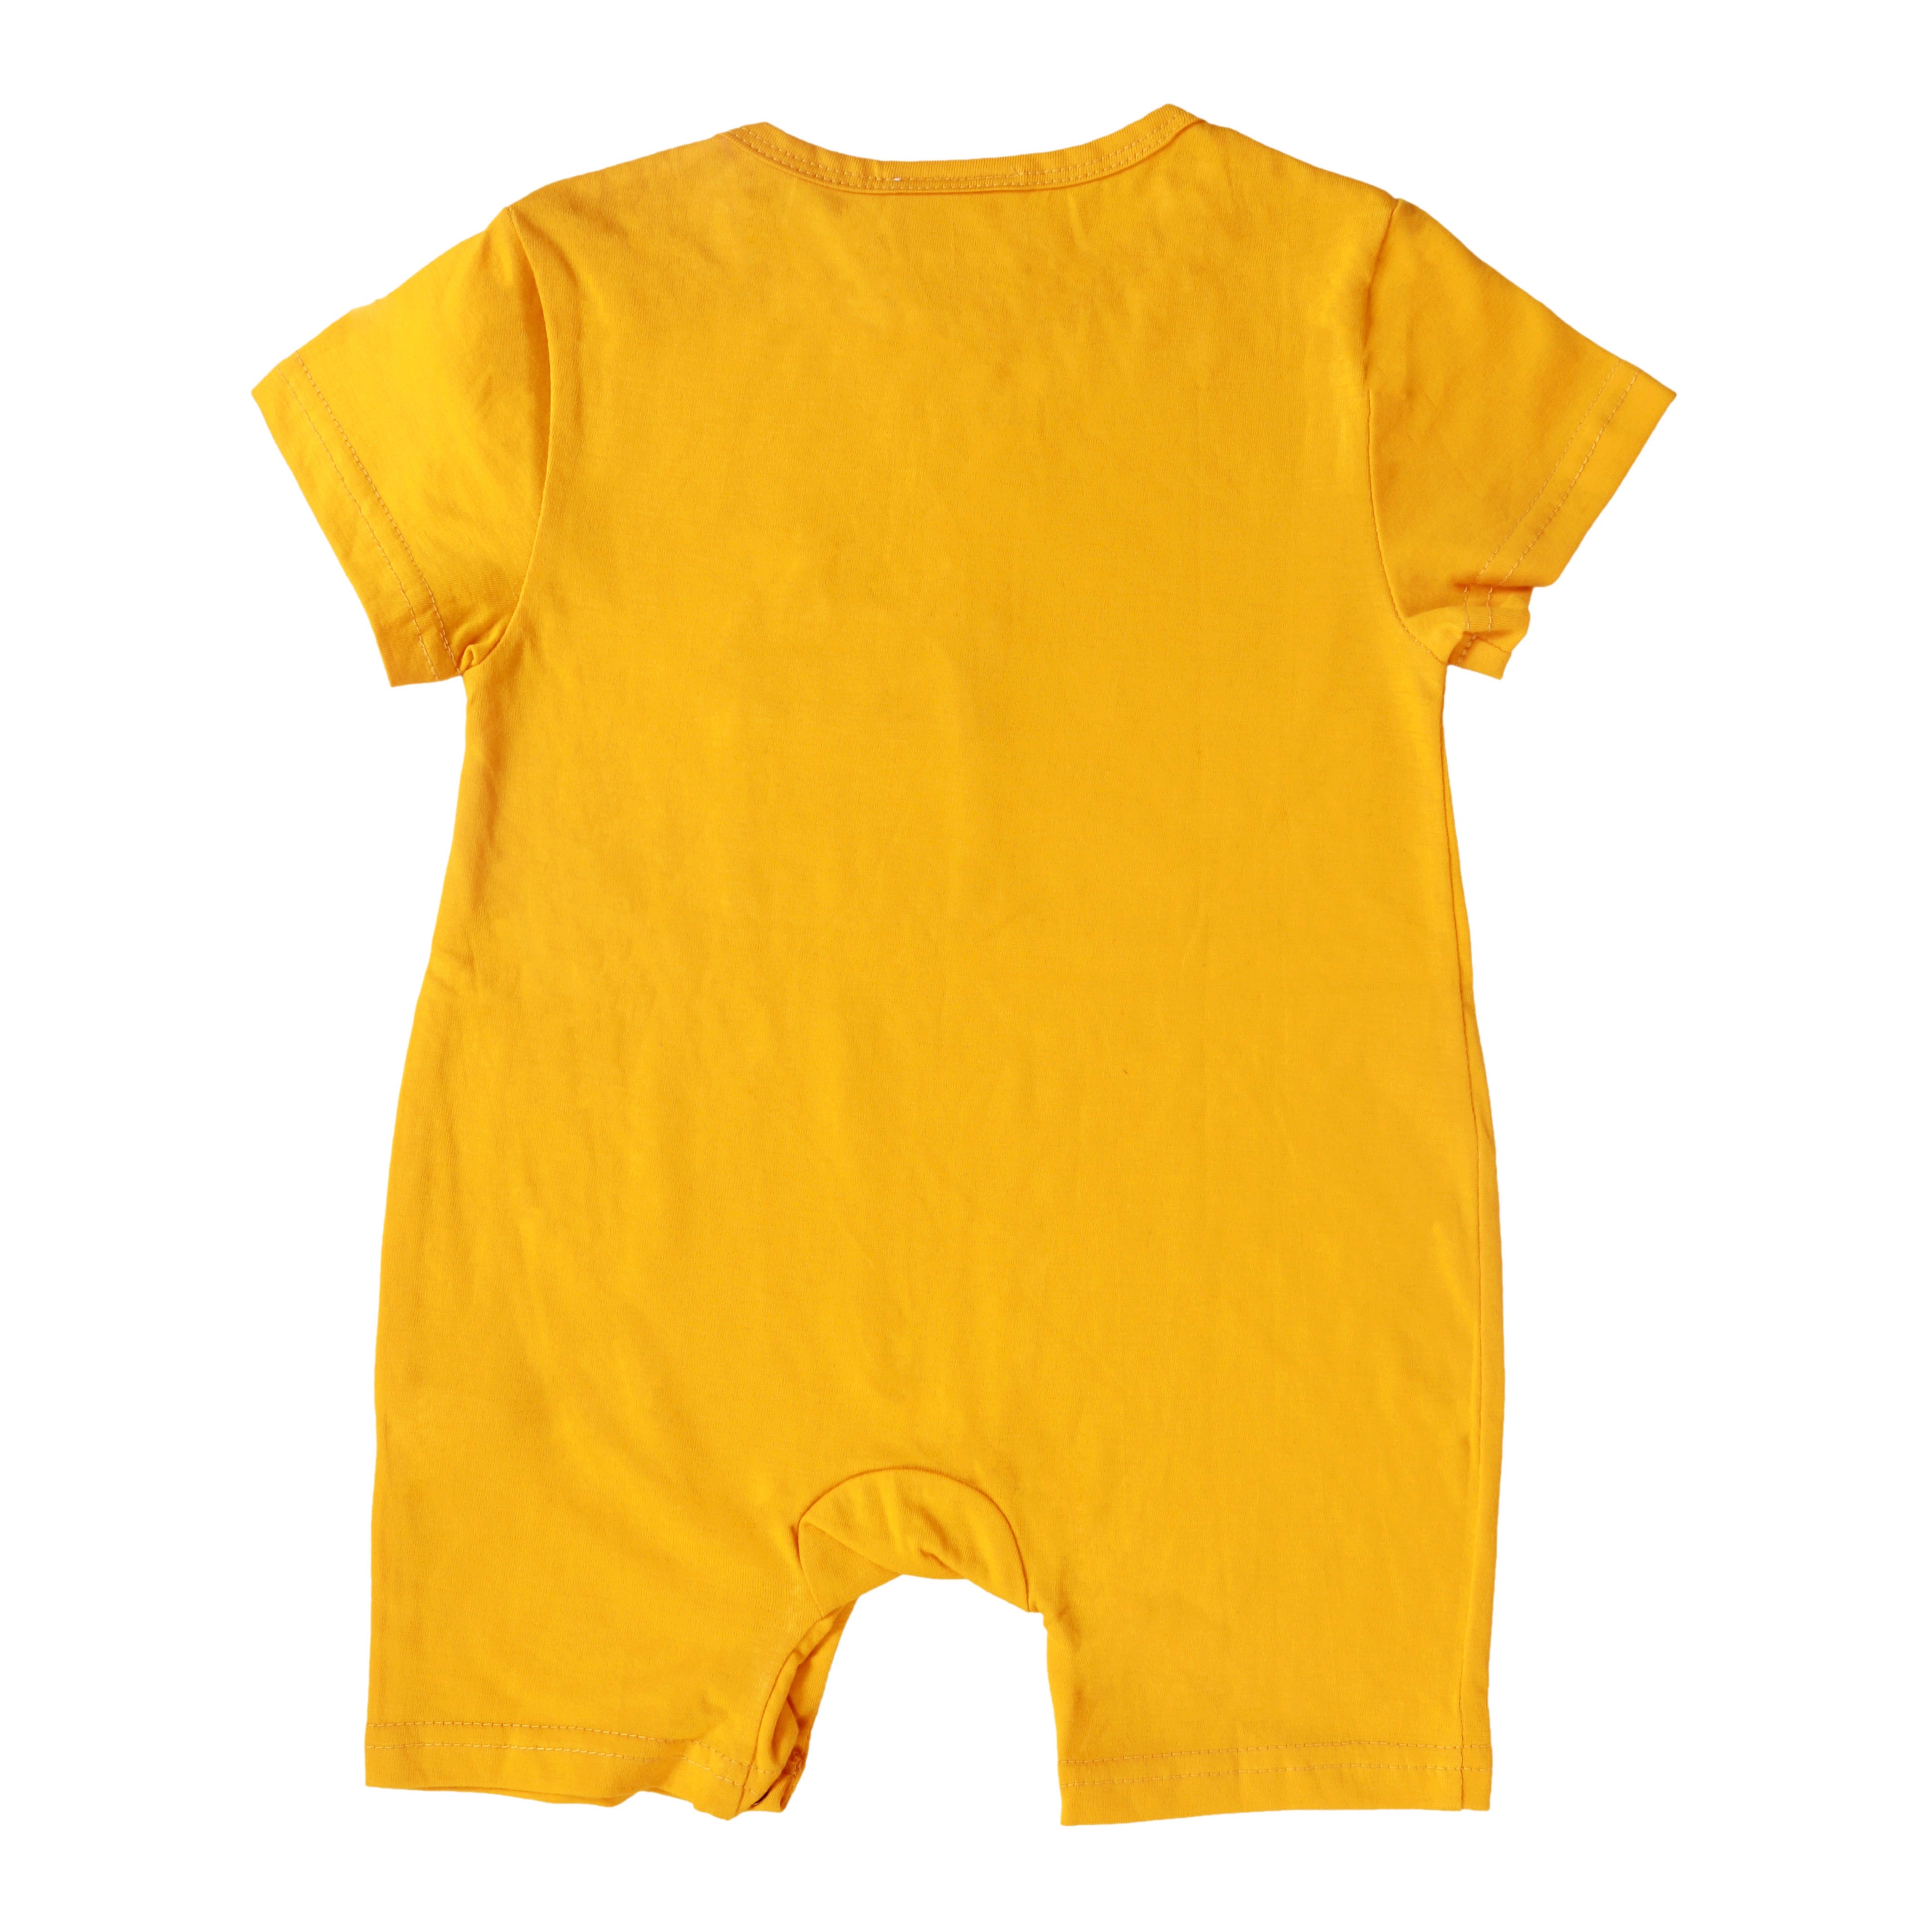 Little By Little 100% Anti Viral, Cotton, Reusable, Anti bacterial & Water Repellent Baby Romper - Yellow